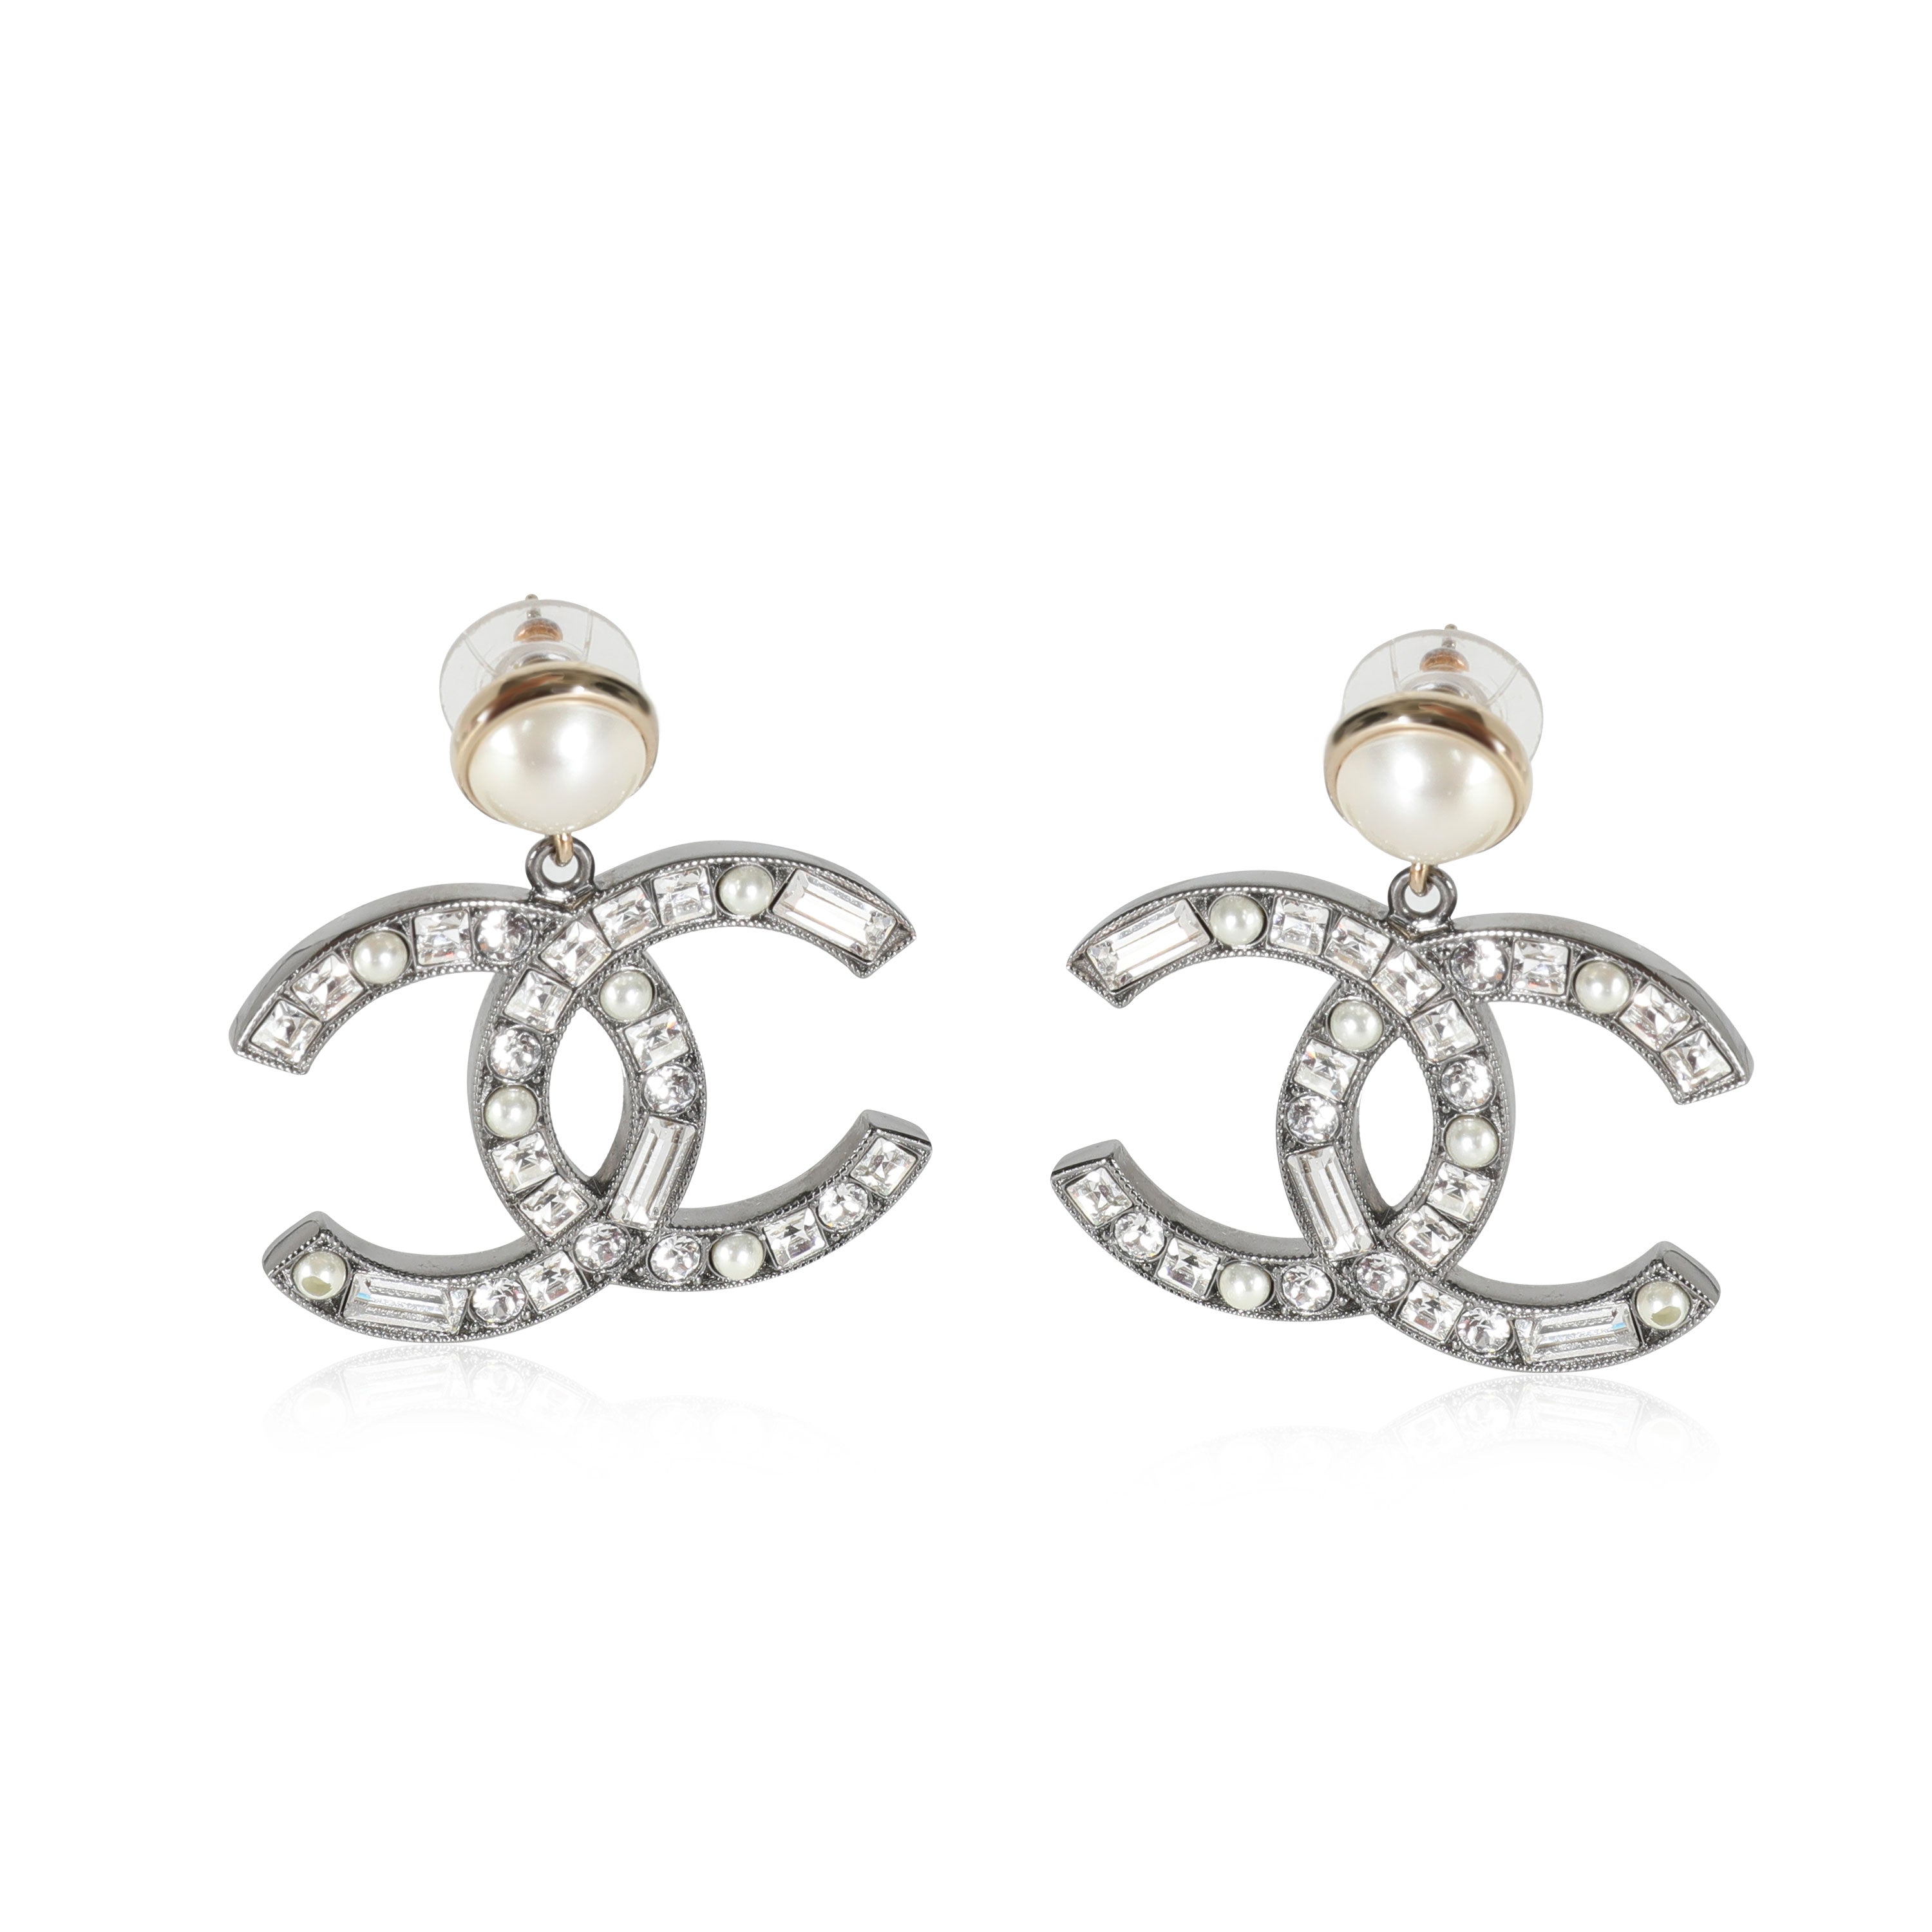 Chanel CC Two-Tone Faux Pearl & Strass Earrings From The 2020